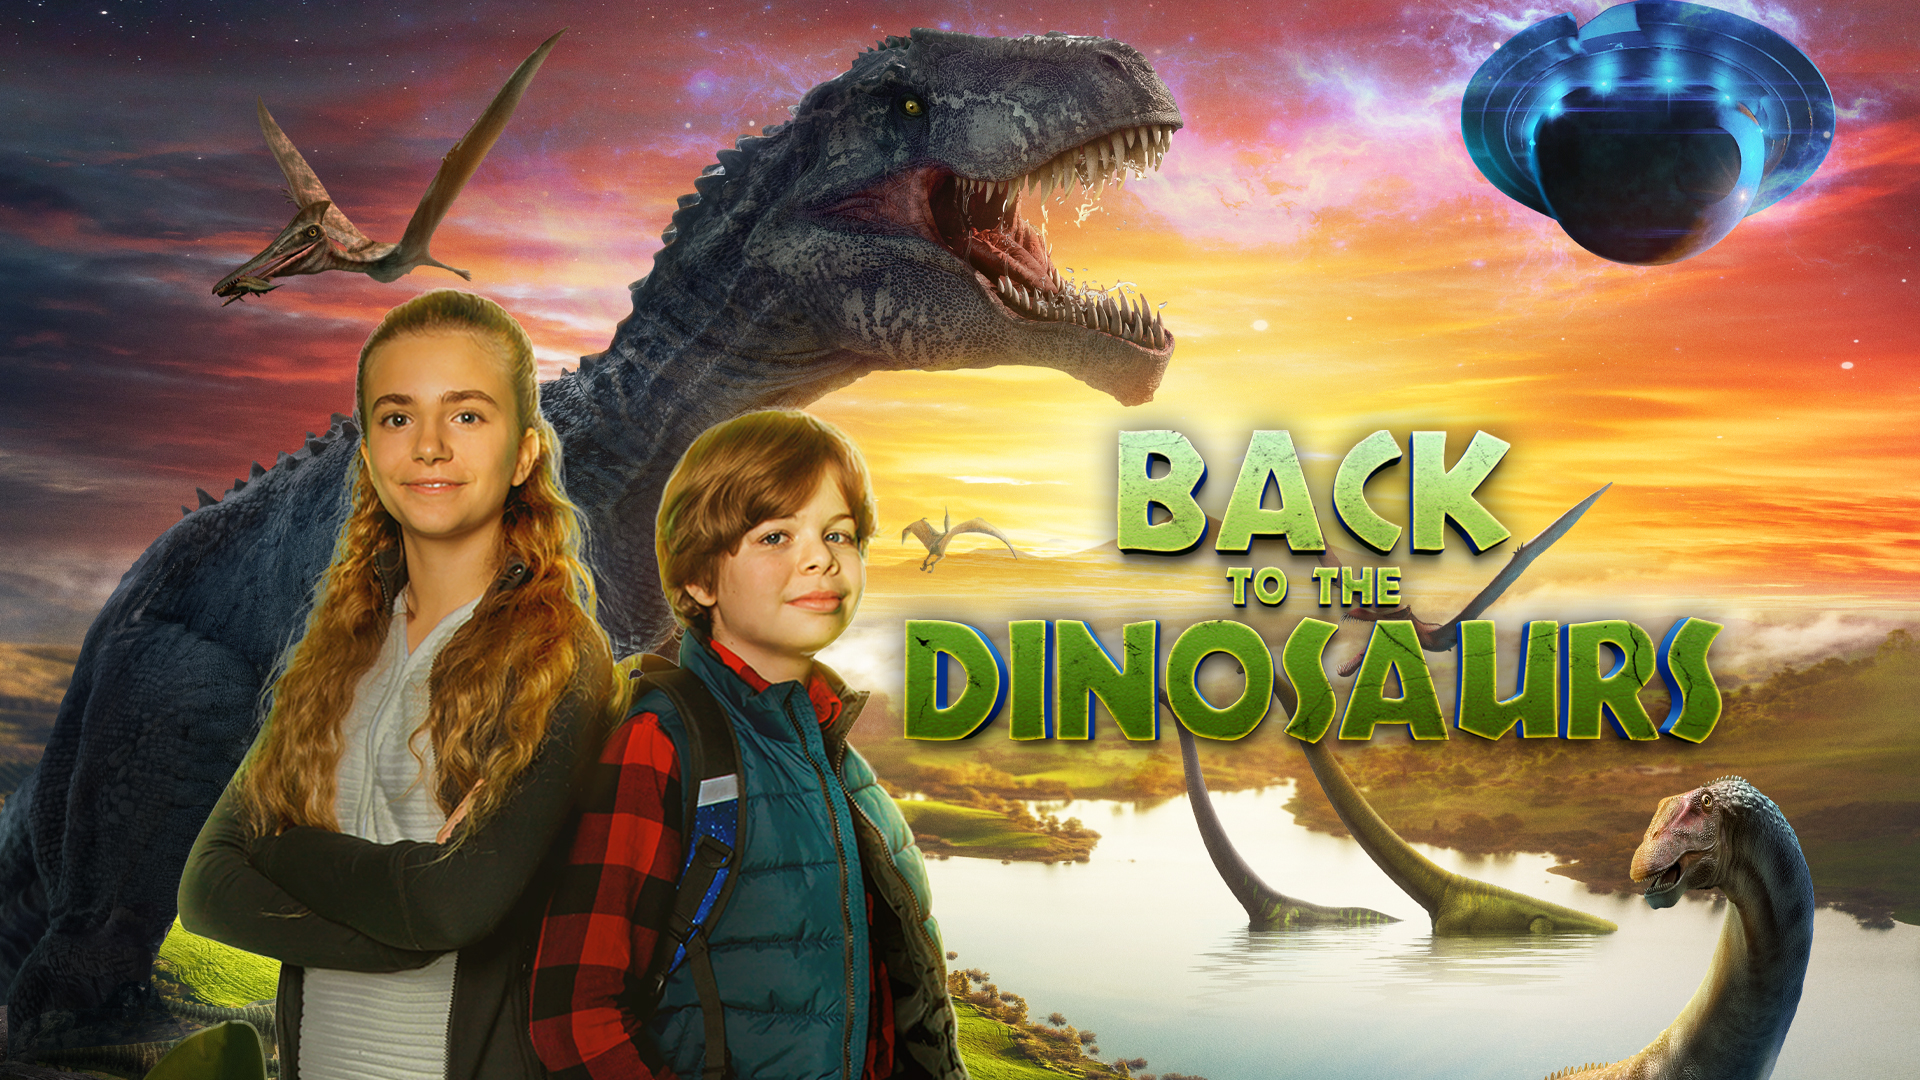 BACK TO THE DINOSAURS